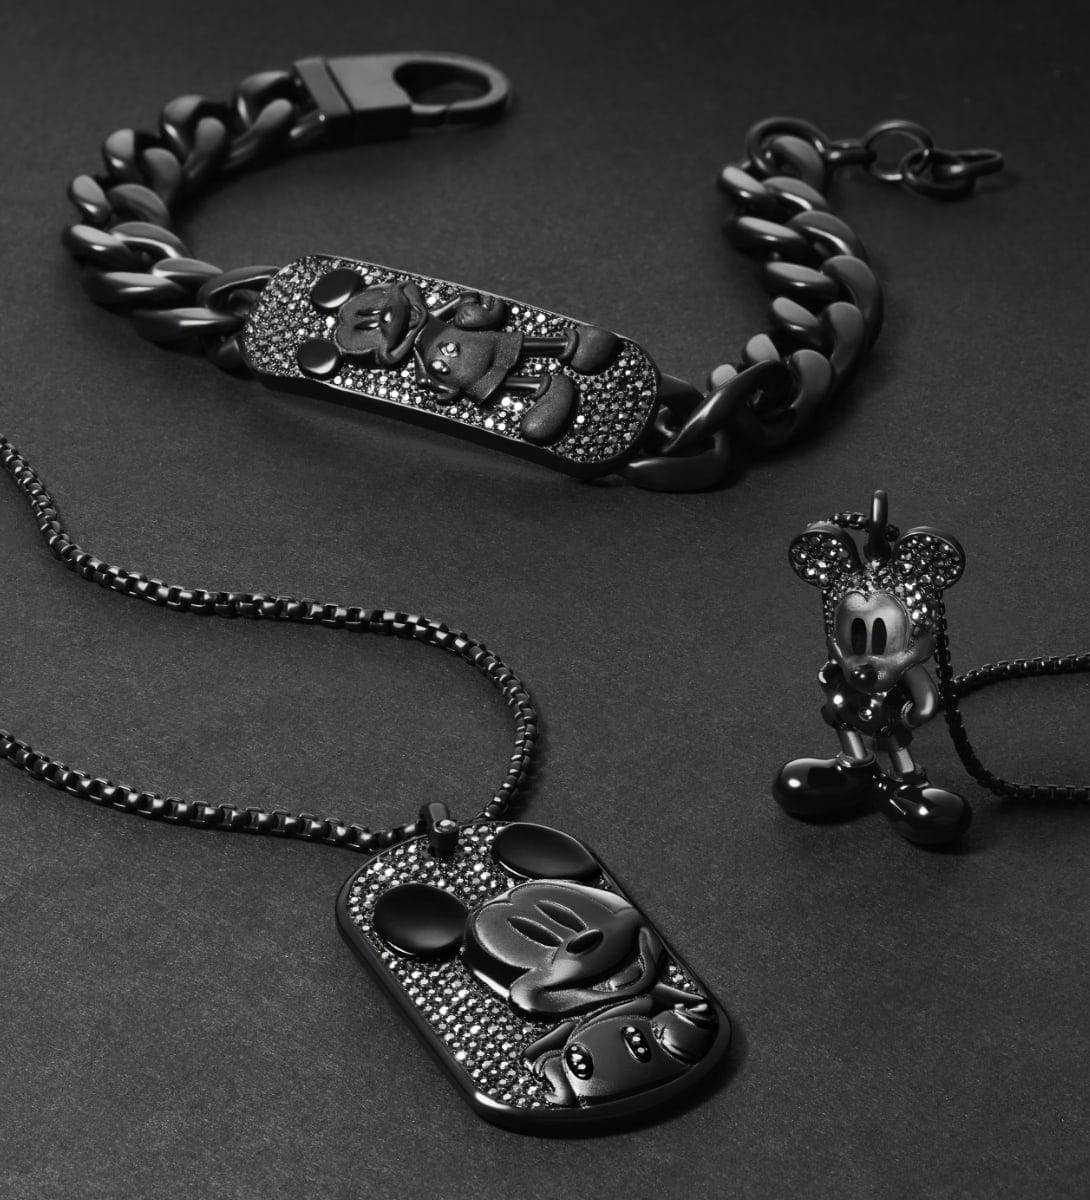 Three pieces of all-black Mickey Mouse jewellery, each studded with hematite crystals. A chain identification bracelet, dog tag-style necklace and figurine pendant necklace are artfully arranged on a black background.